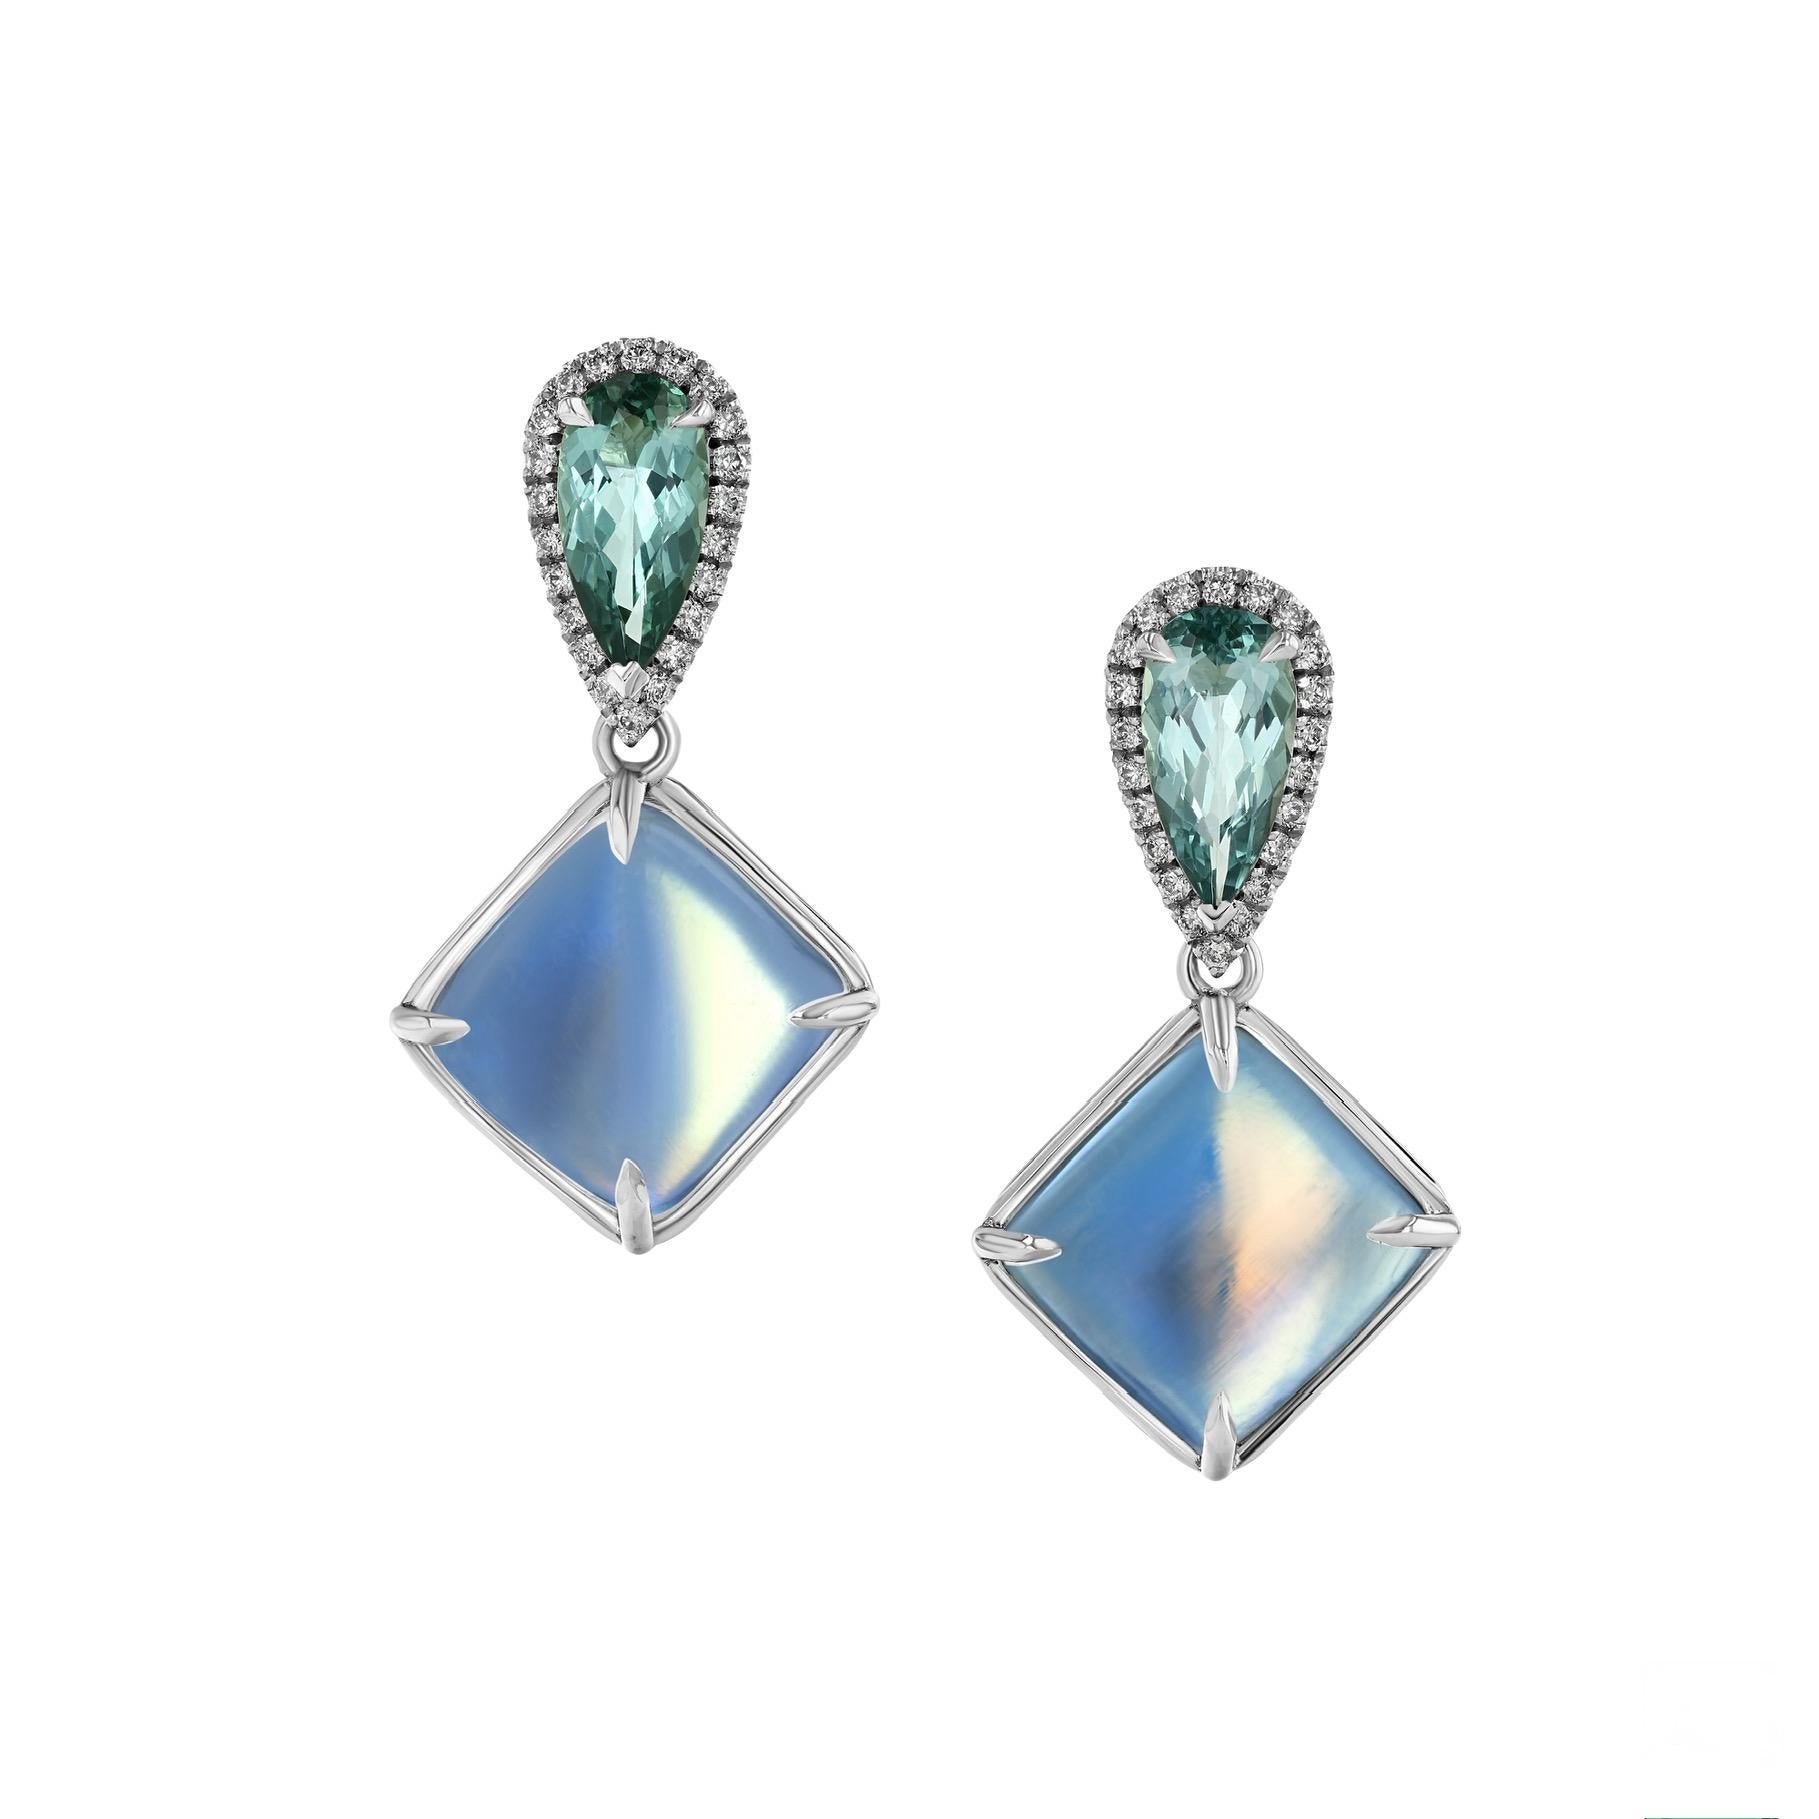 18.02 carats of soothing rainbow Moonstones are paired with 1.40 carats of lagoon Tourmalines, and 0.28 carats of white diamonds in 18K white gold earrings. 